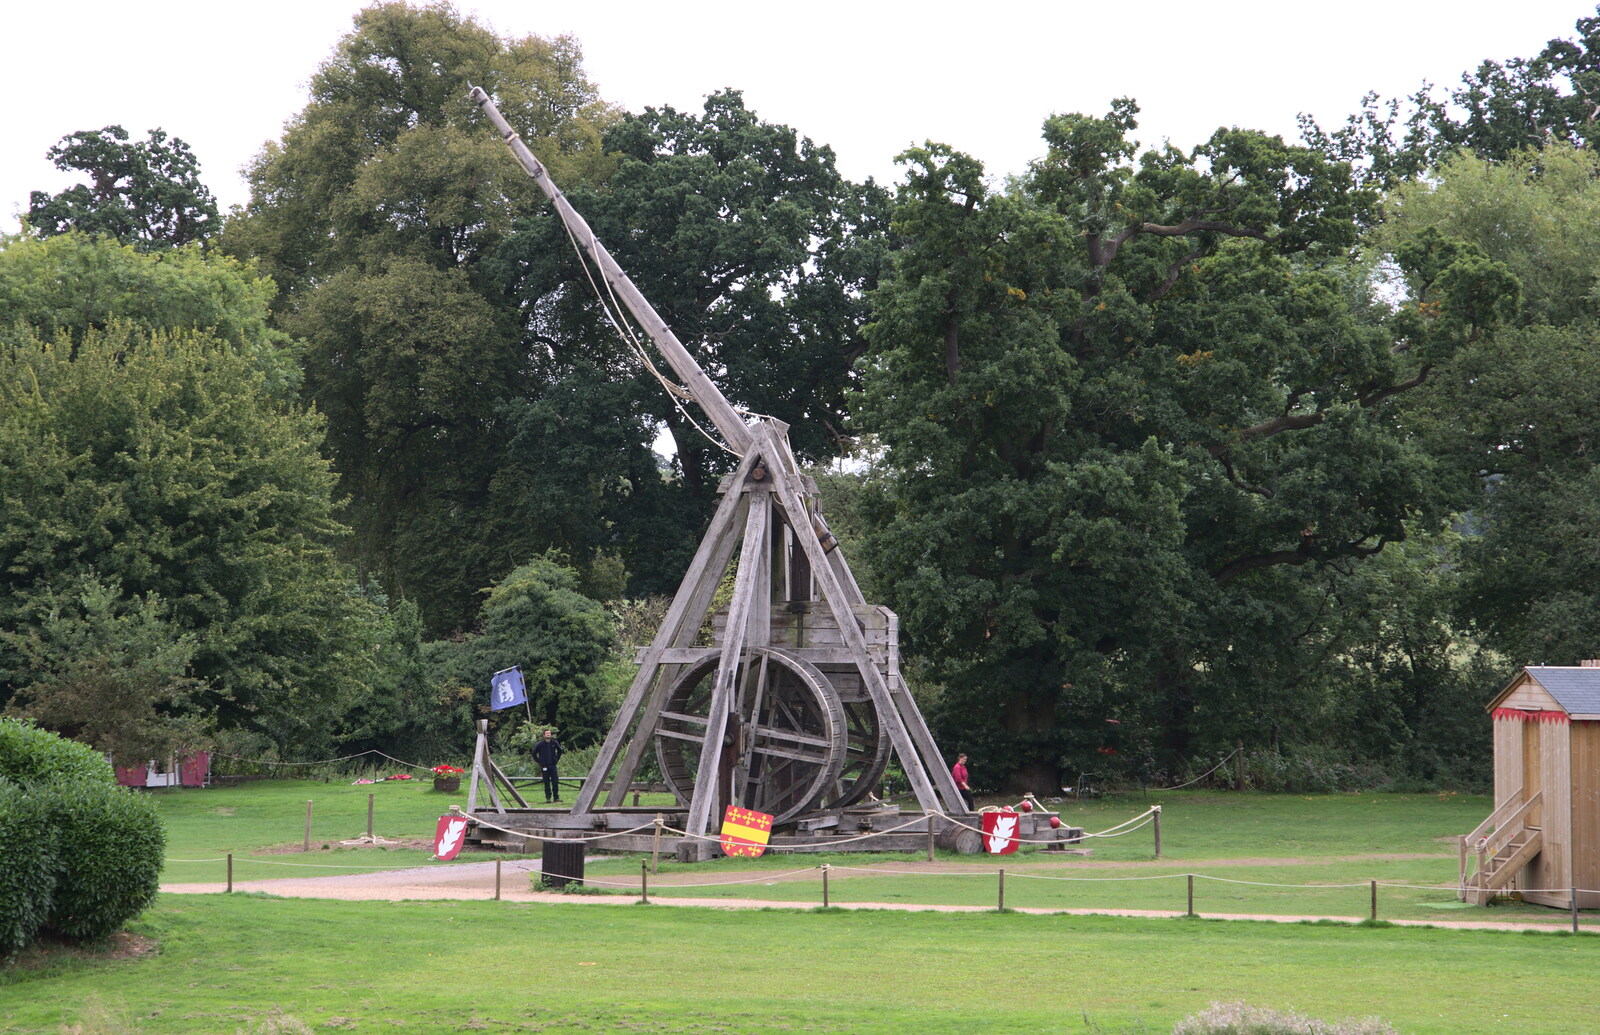 The trebuchet flings its rock from A Day at Warwick Castle, Warwickshire - 8th September 2018